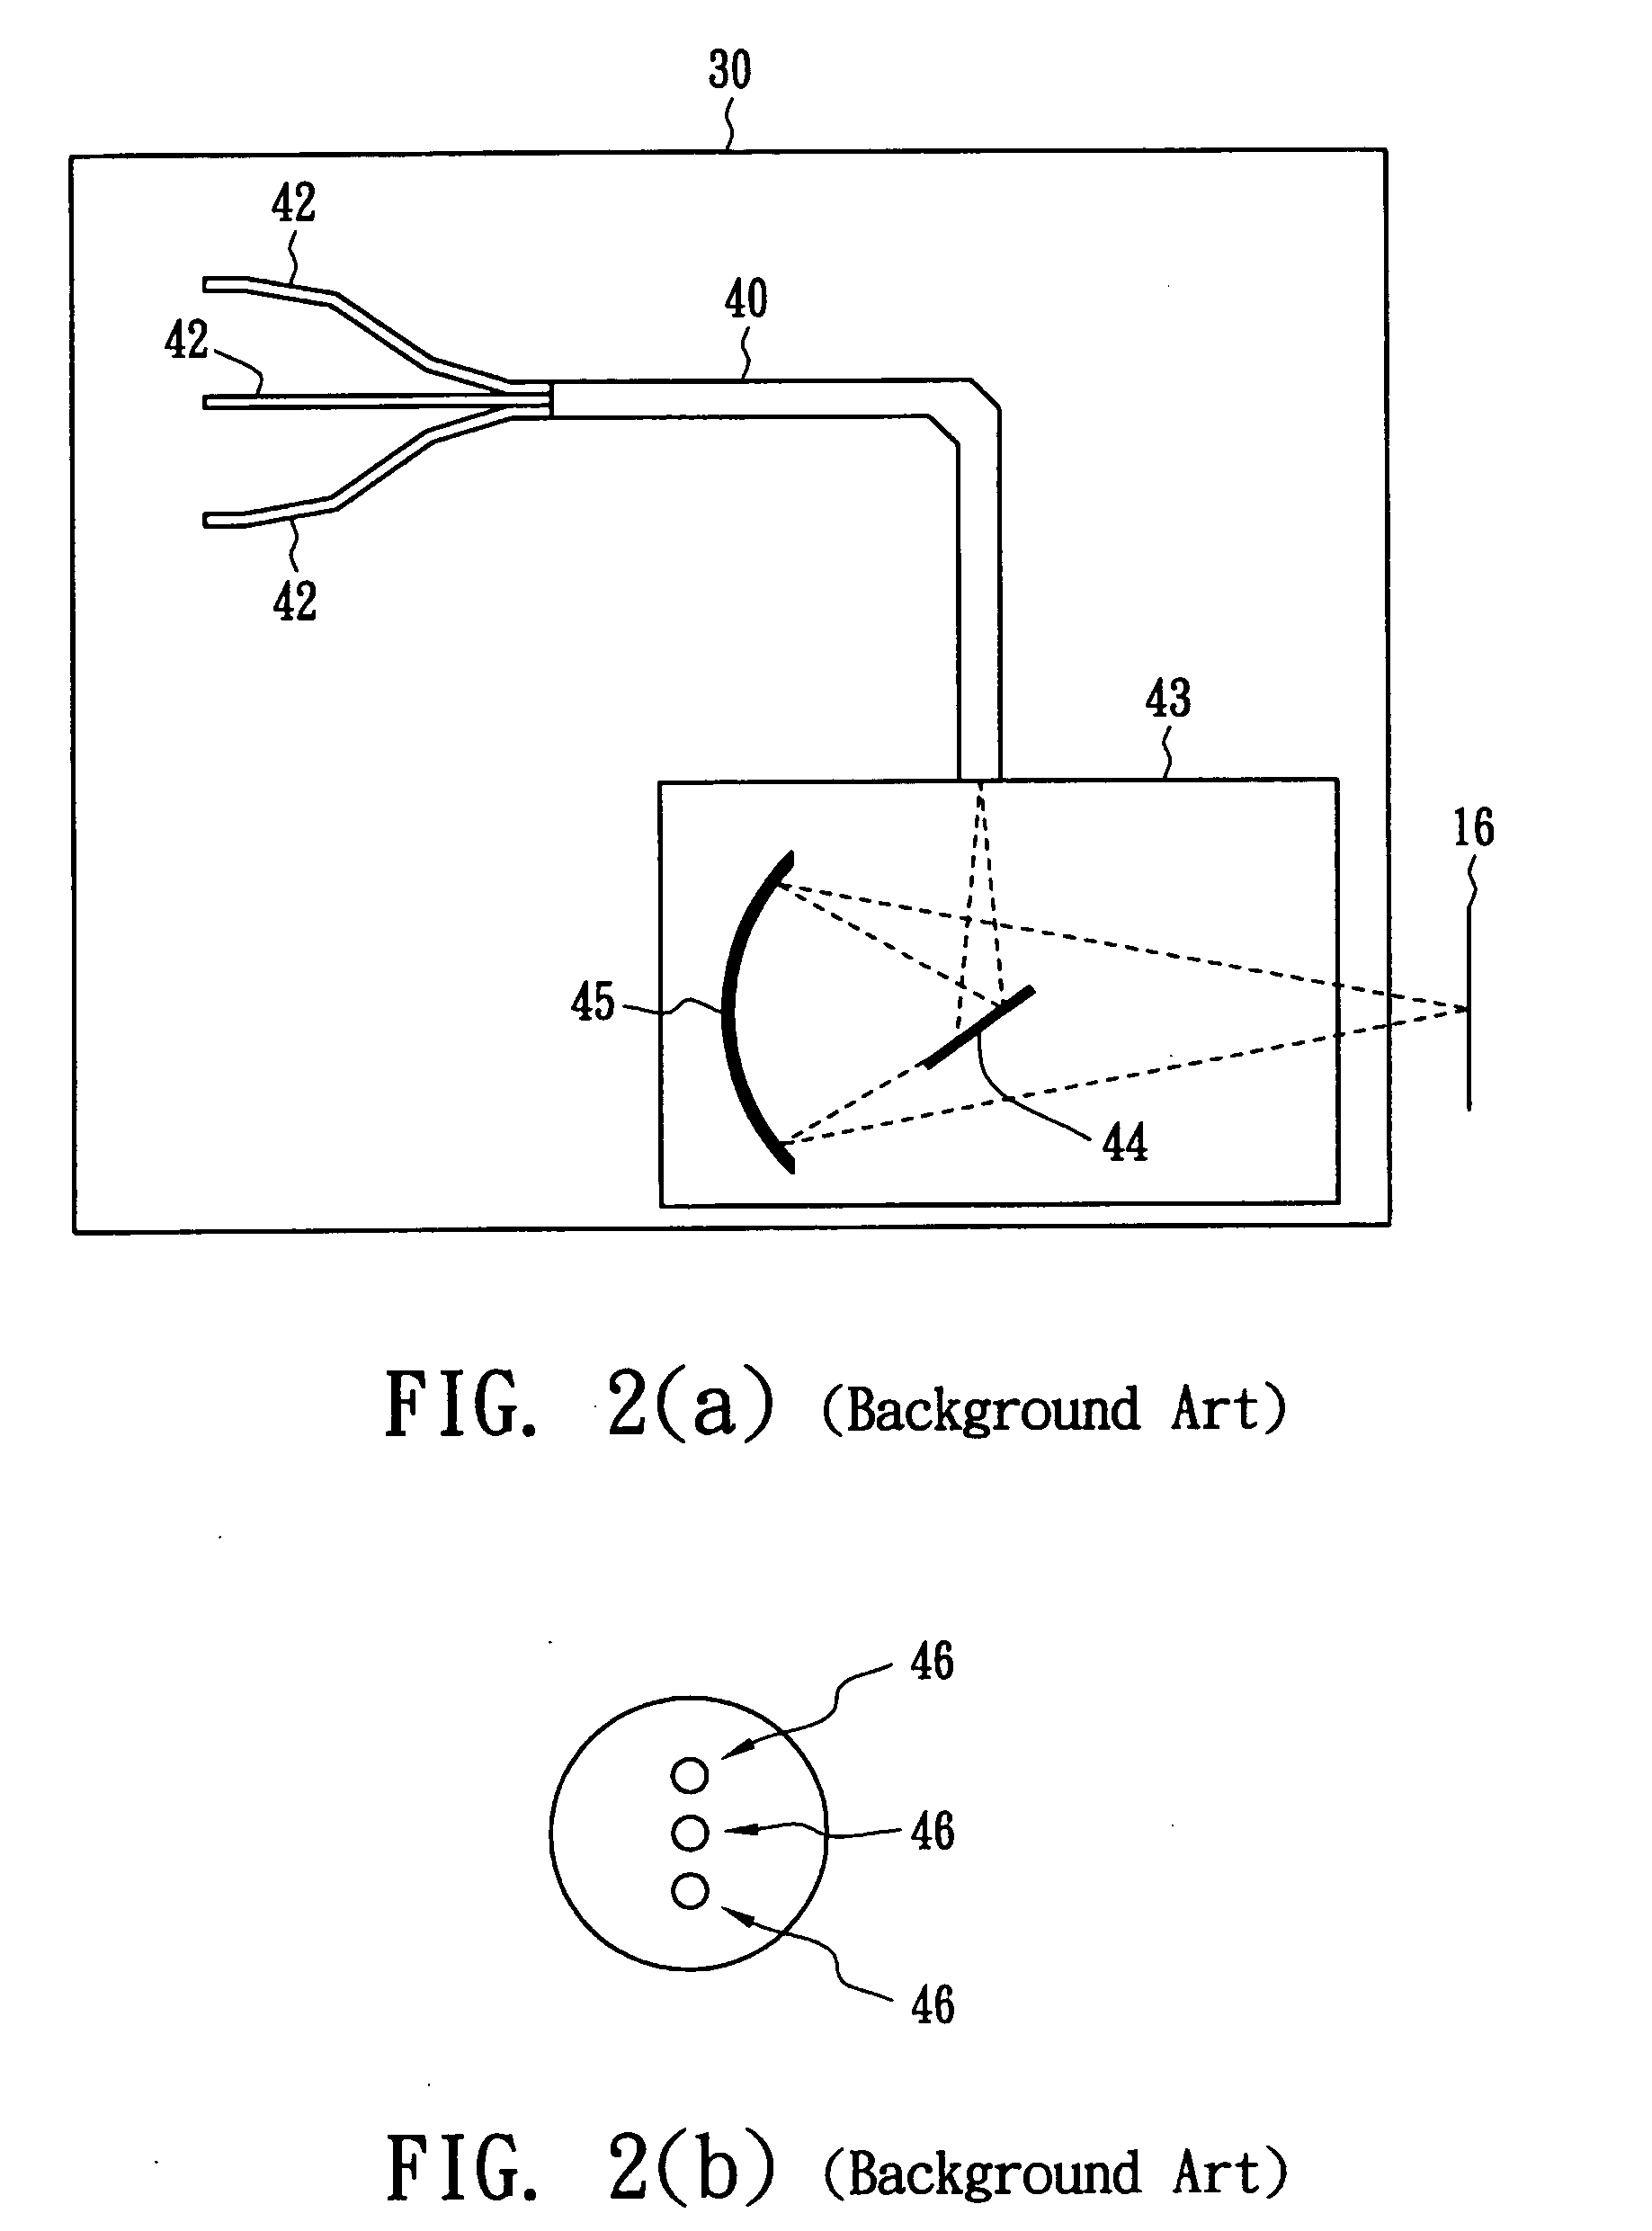 Apparatus for measuring imaging spectrograph